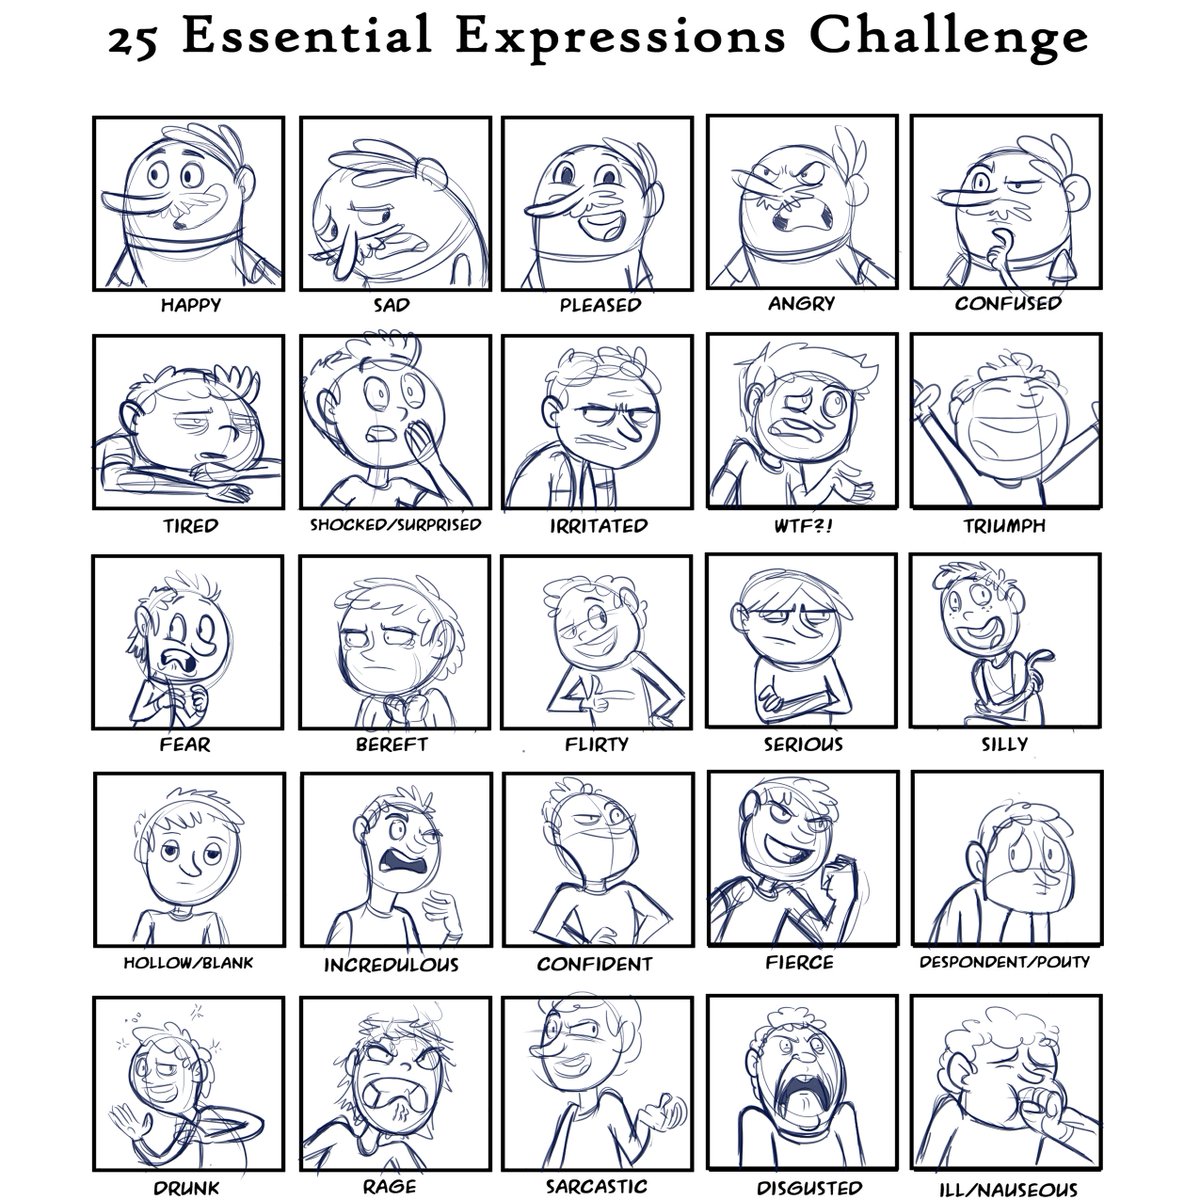 Saw this and thought it would be fun! 
#animator #Faces #cartoon #Expression #drawing #doodles #cartoonist #funny #howyoufeeling #emotions #ArtistonTwitter